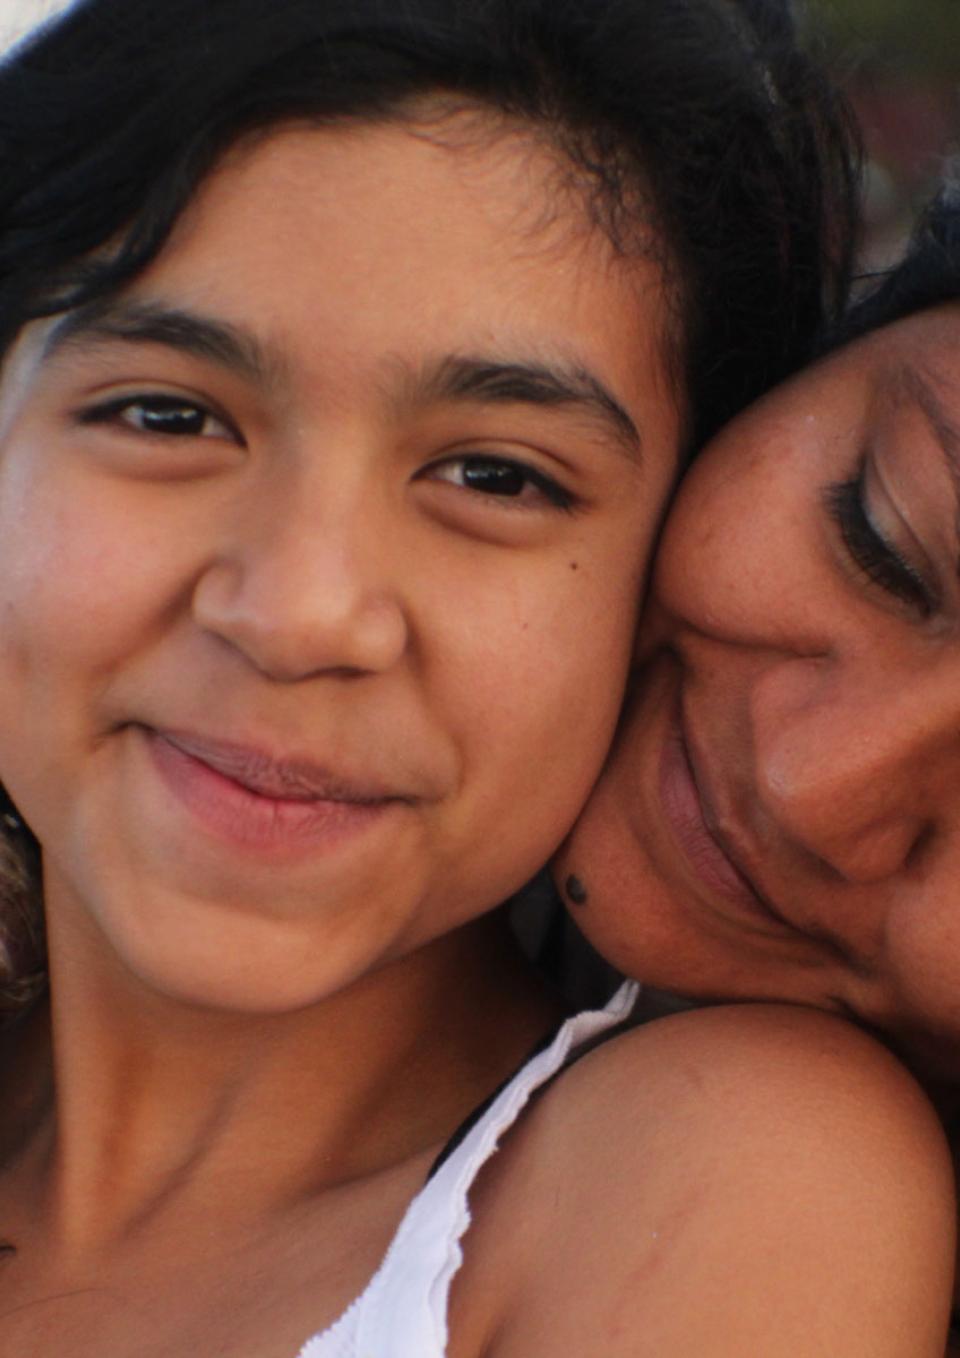 A still from the New Day film Life on the Line. A young Mexican-American girl, Kimberly Torrez smiles sweetly towards the camera. A woman, likely her mother Vanessa Torrez sits behind Kimberly and rests her head on her shoulder. She turns her face into Kimberly’s neck with a loving smile.